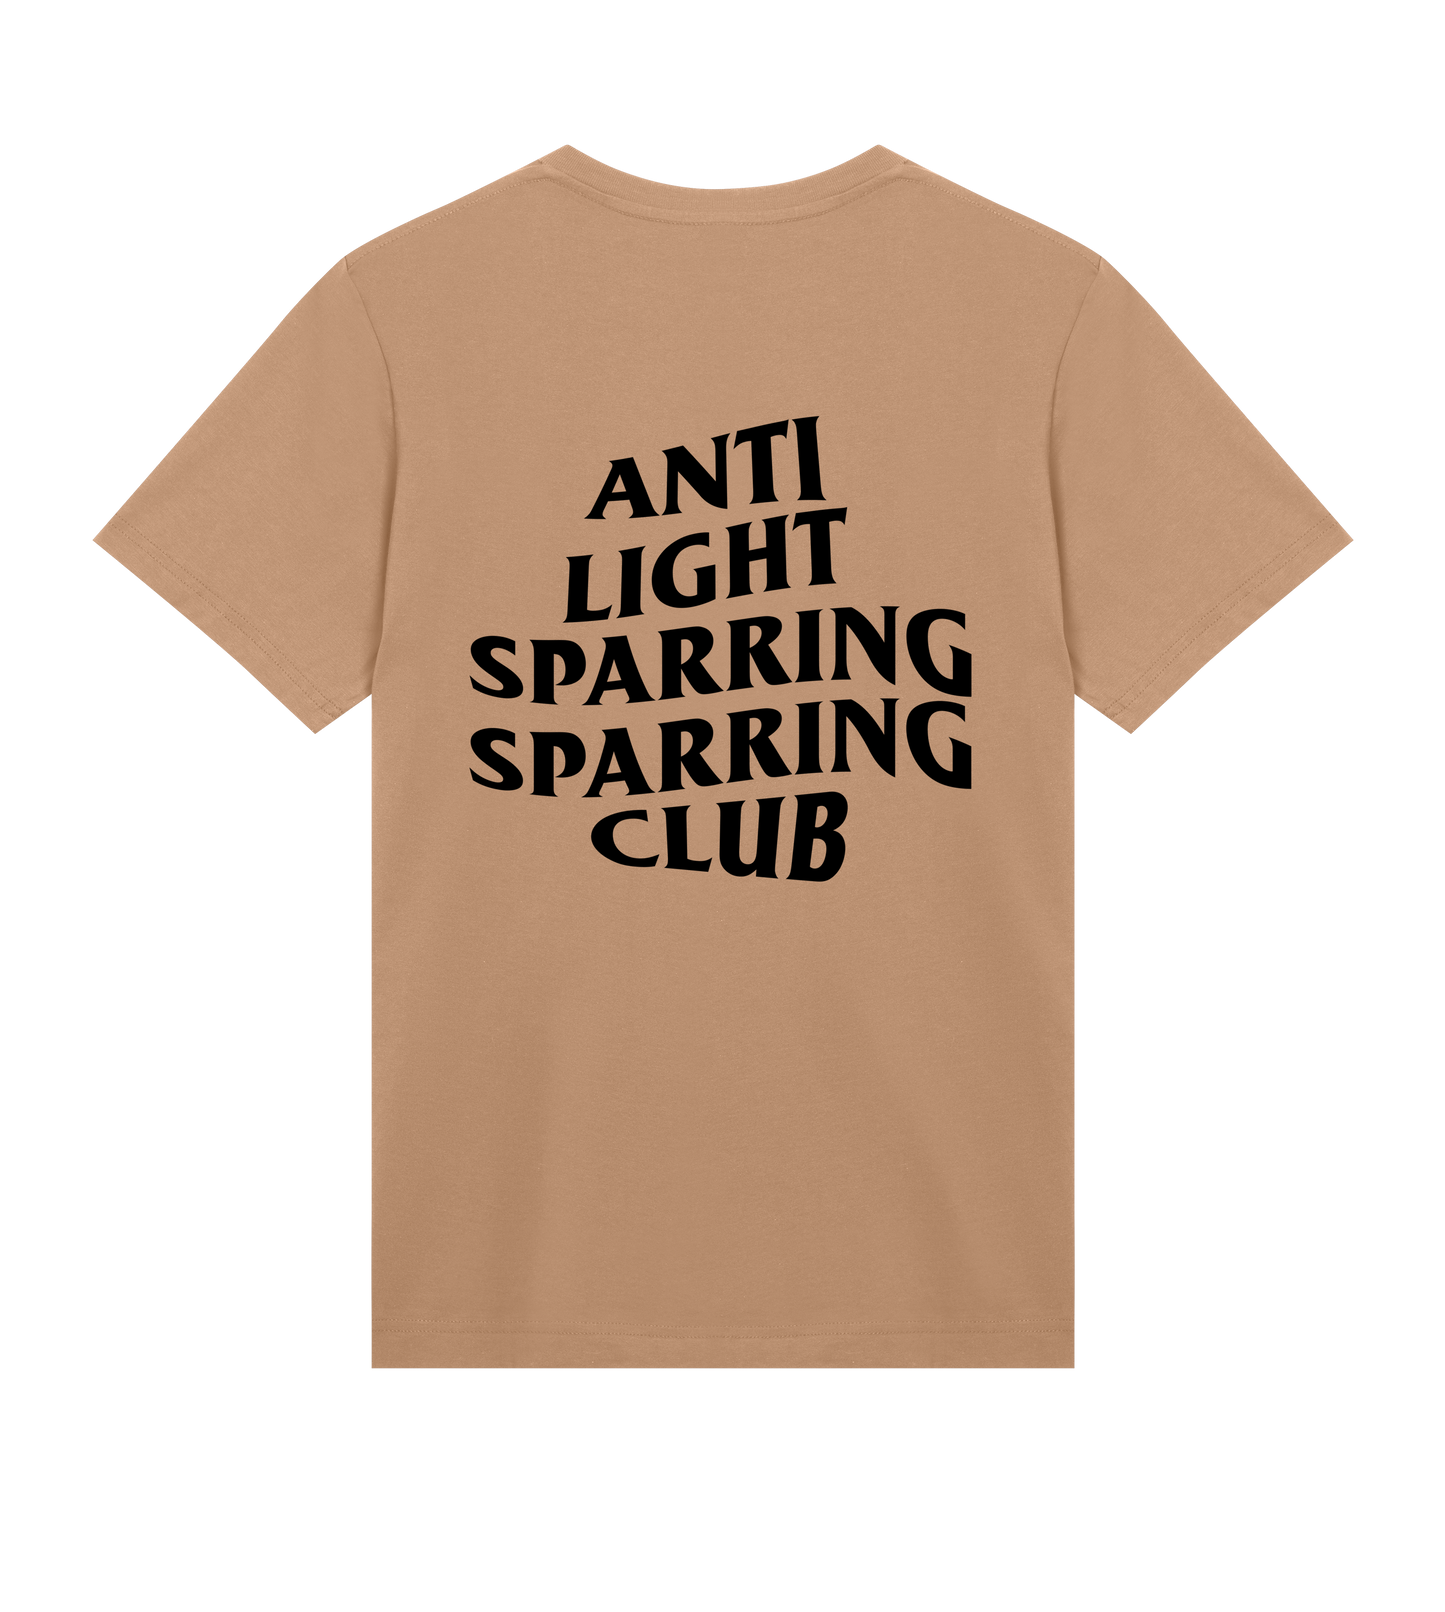 ANTI LIGHT SPARRING SPARRING CLUB 'ESSENTIAL' TEE V1